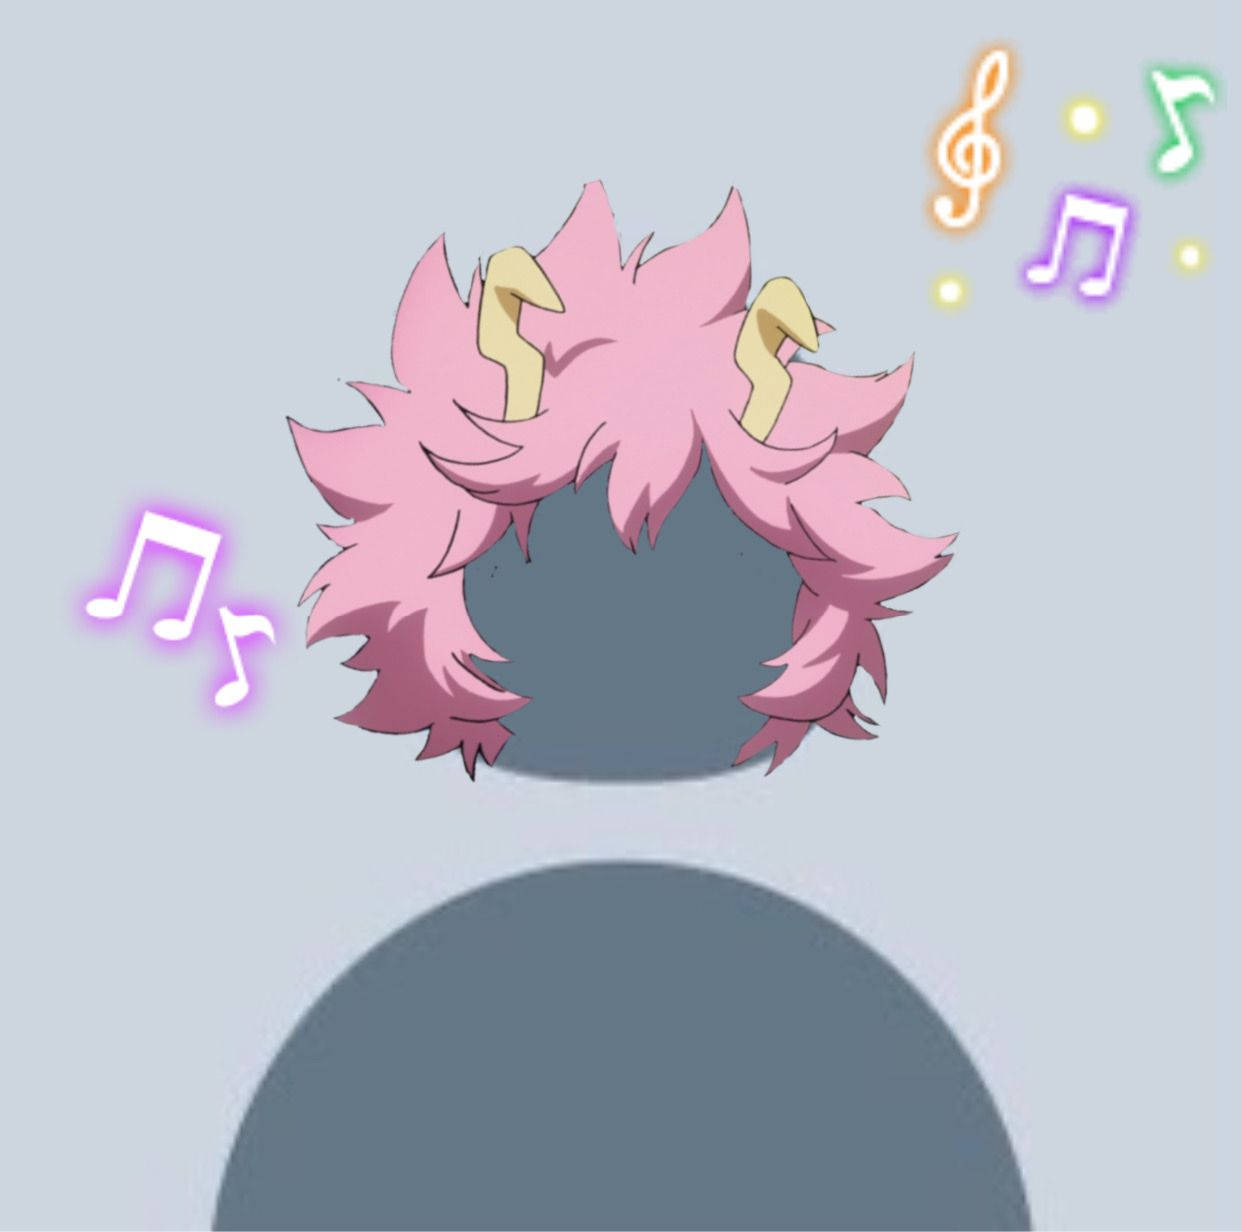 Musical Noted On Default PFP Wallpaper